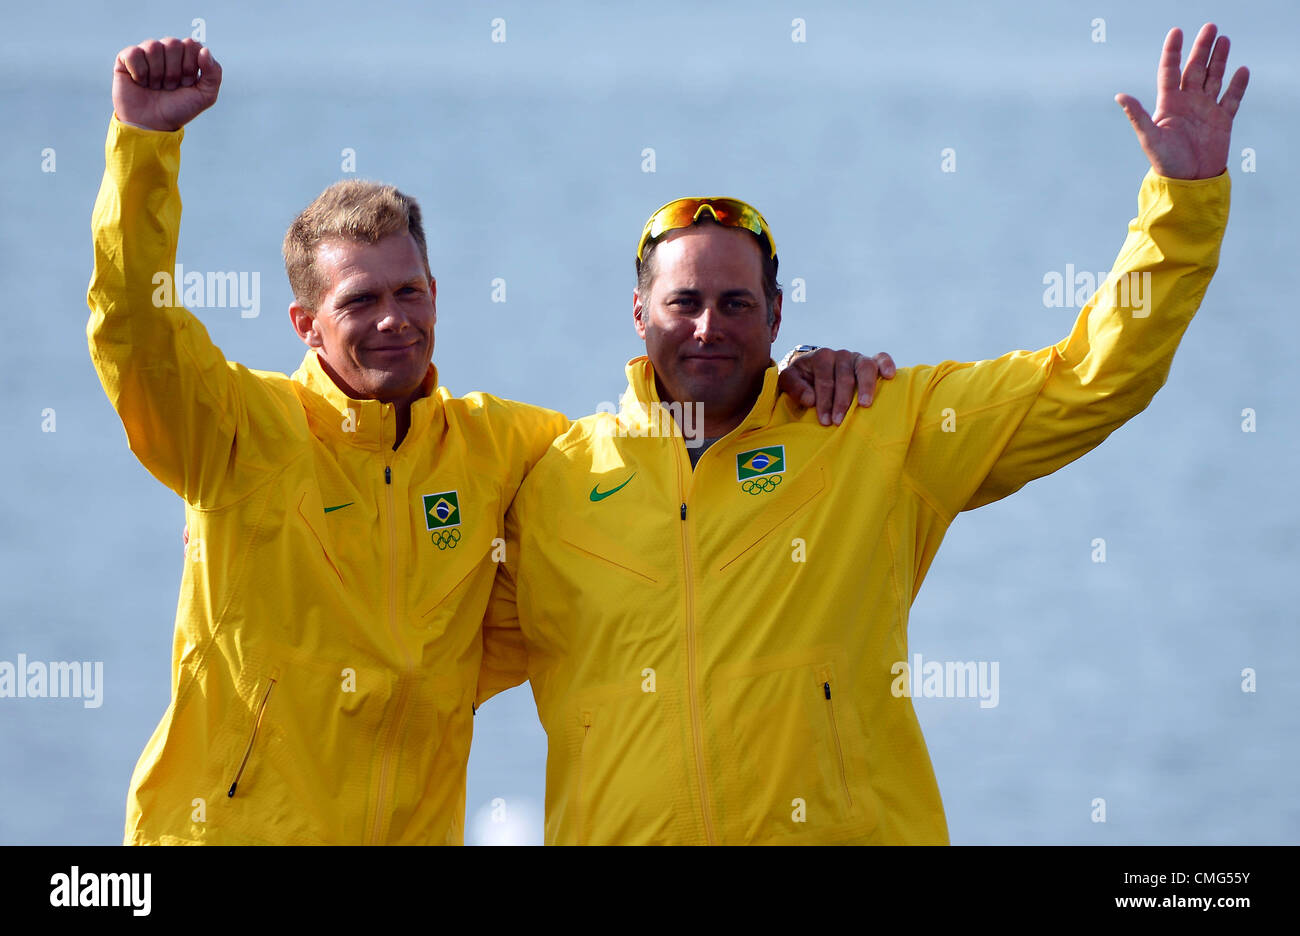 Olympic Sailing, action during the London 2012 Olympic Games at the Weymouth & Portland Venue, Dorset, Britain, UK.  Bruno Prada and Robert Scheidt of Brazil celebrate with their bronze medal on the podium of the Star sailing class  August 5th, 2012 Stock Photo